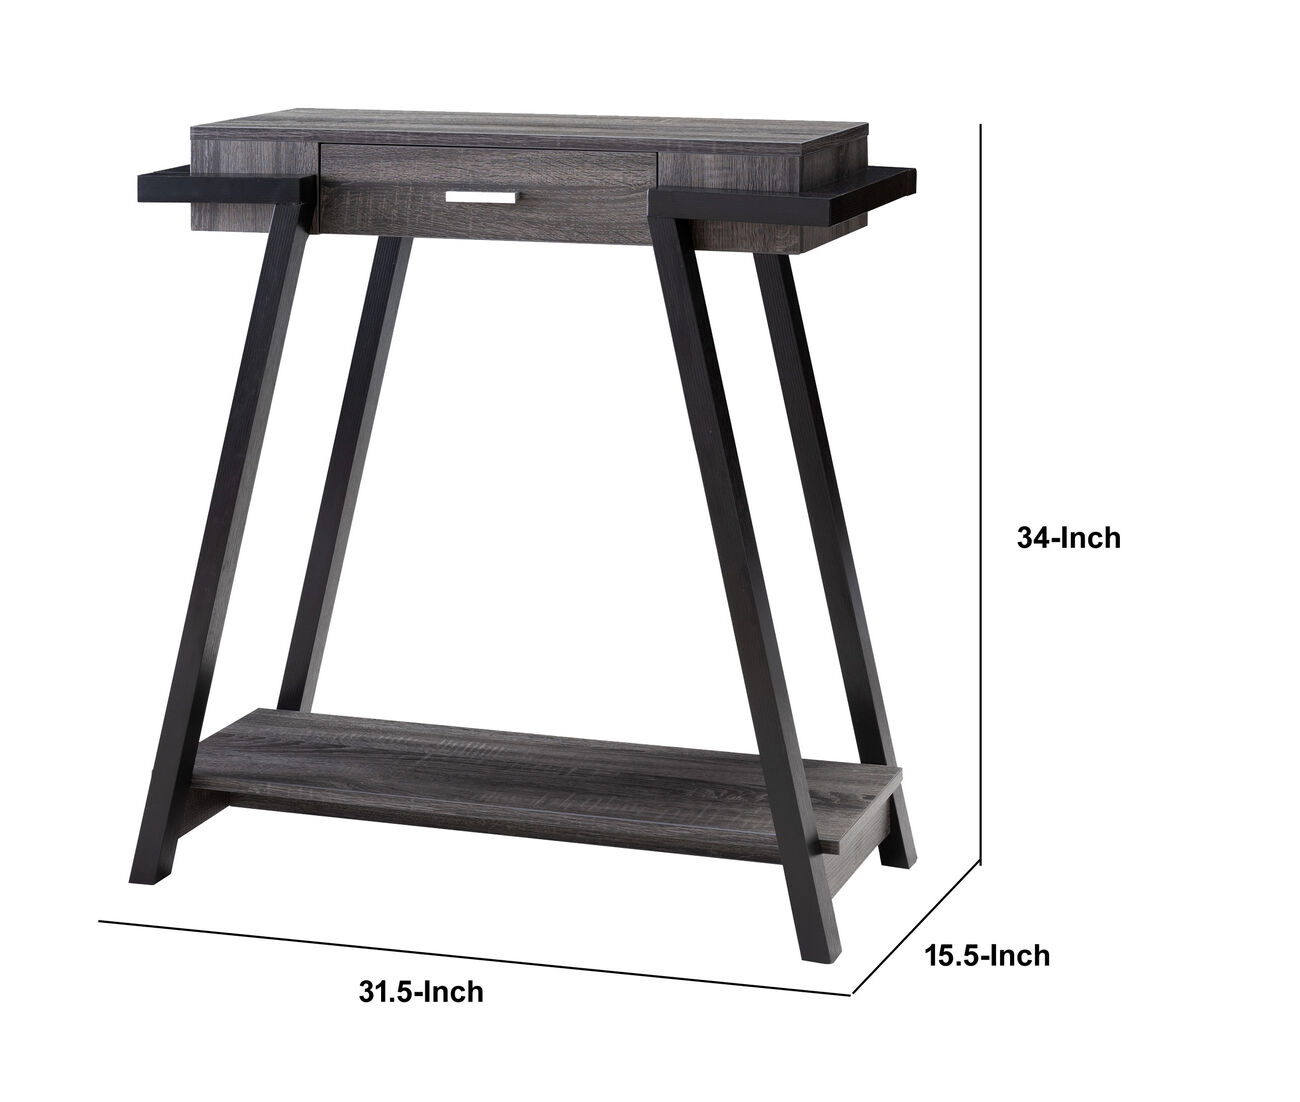 Wooden Console Table with Angled Leg Support and Drawer,Black and Gray